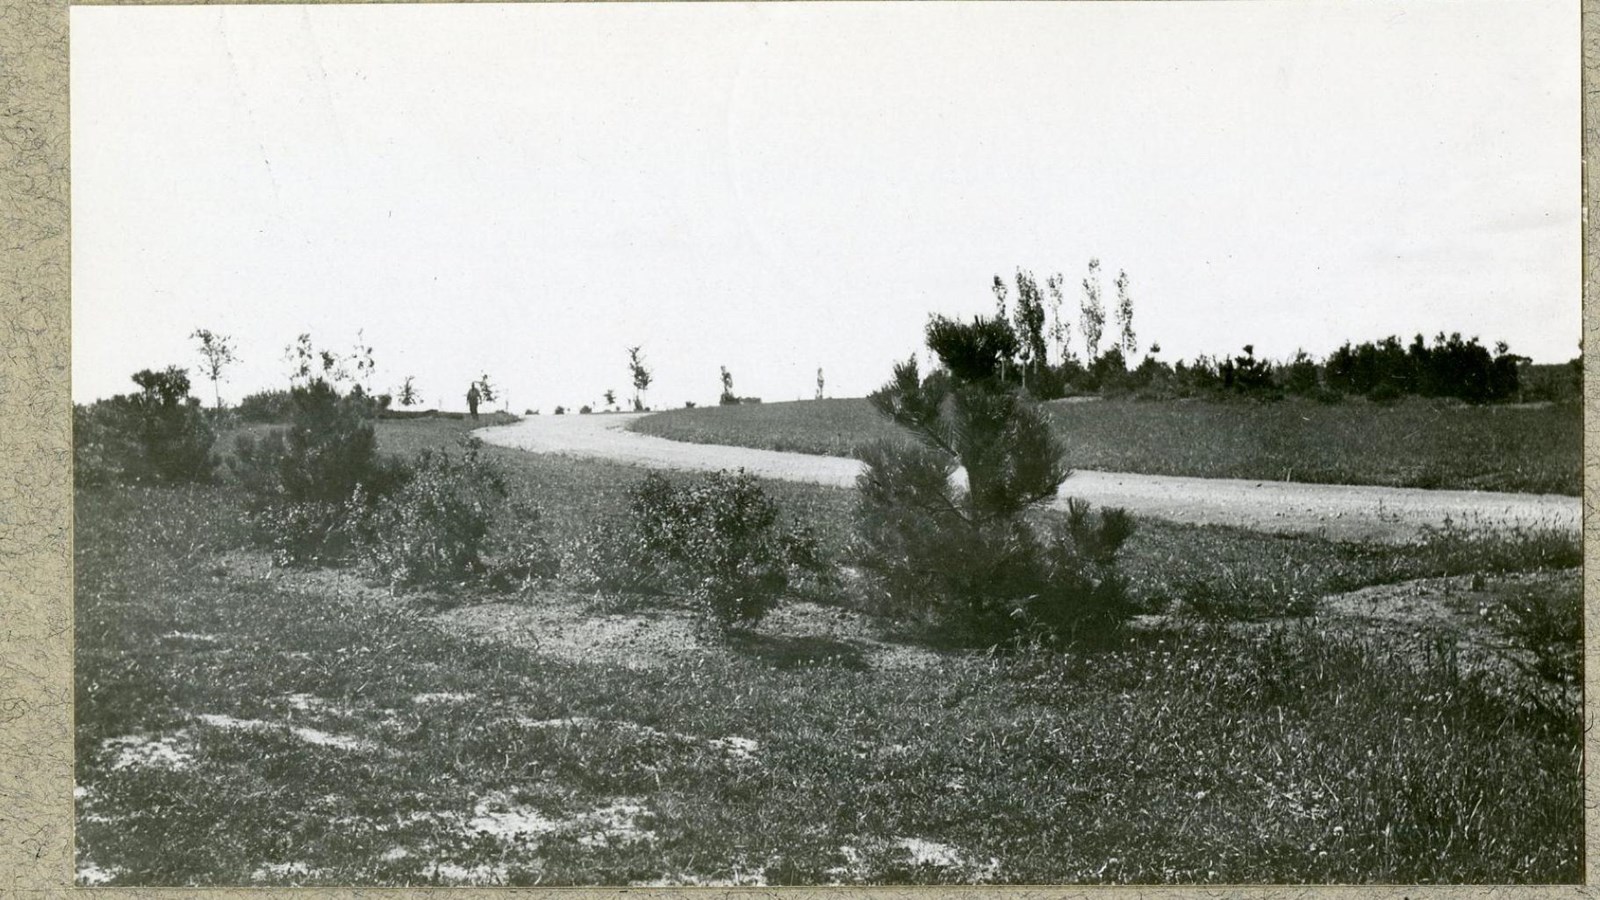 Black and white of curving road up grassy hill with shrubs along the side, trees in distance